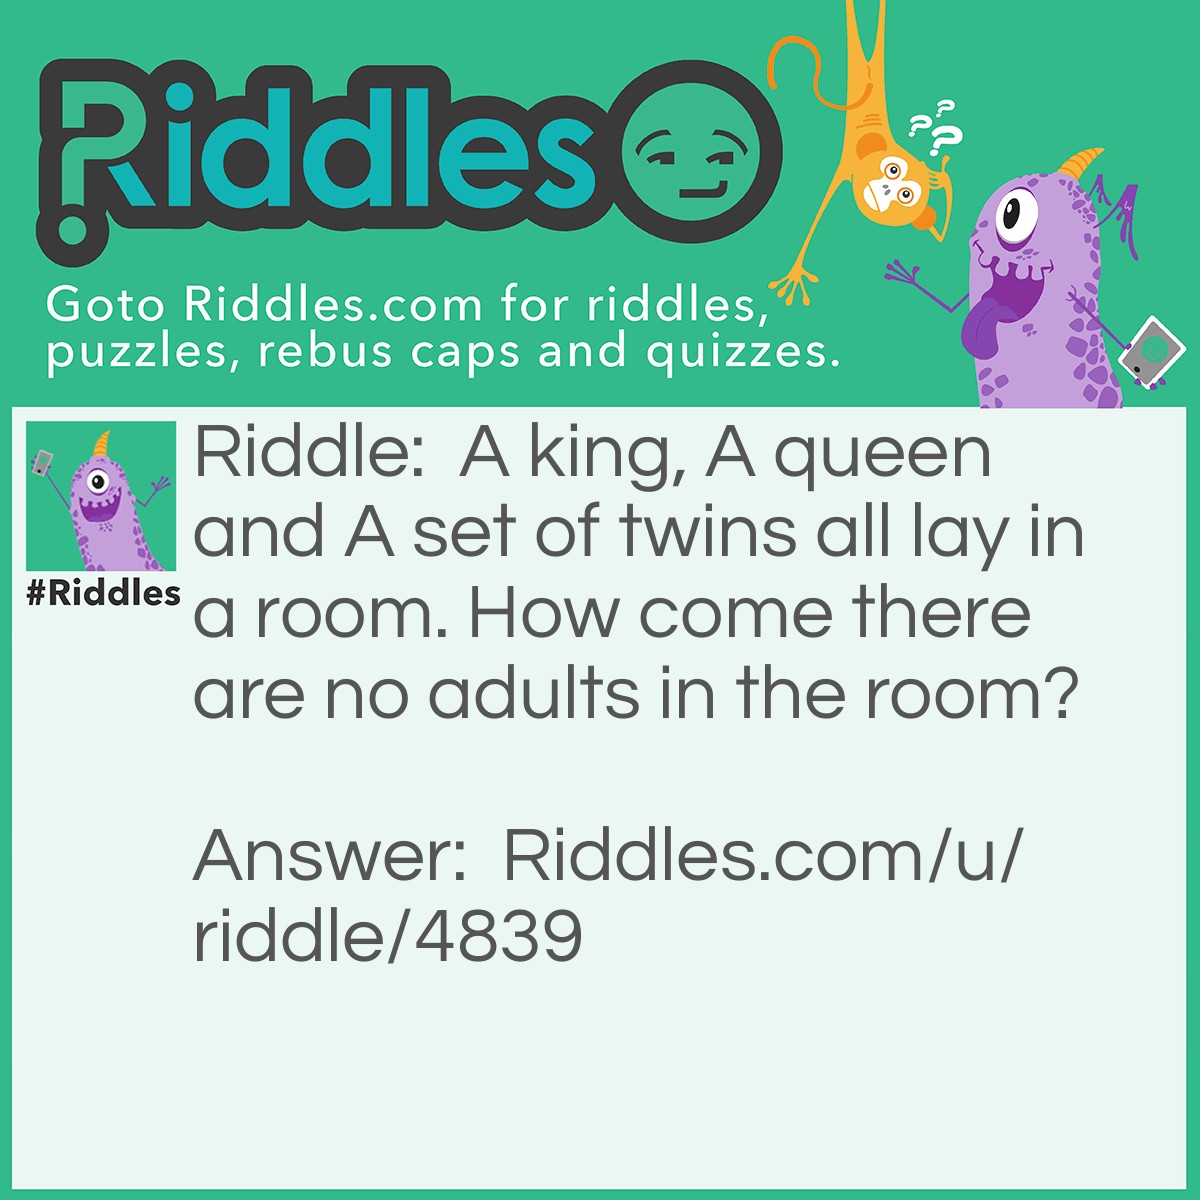 Riddle: A king, A queen and A set of twins all lay in a room. How come there are no adults in the room? Answer: They are all beds.